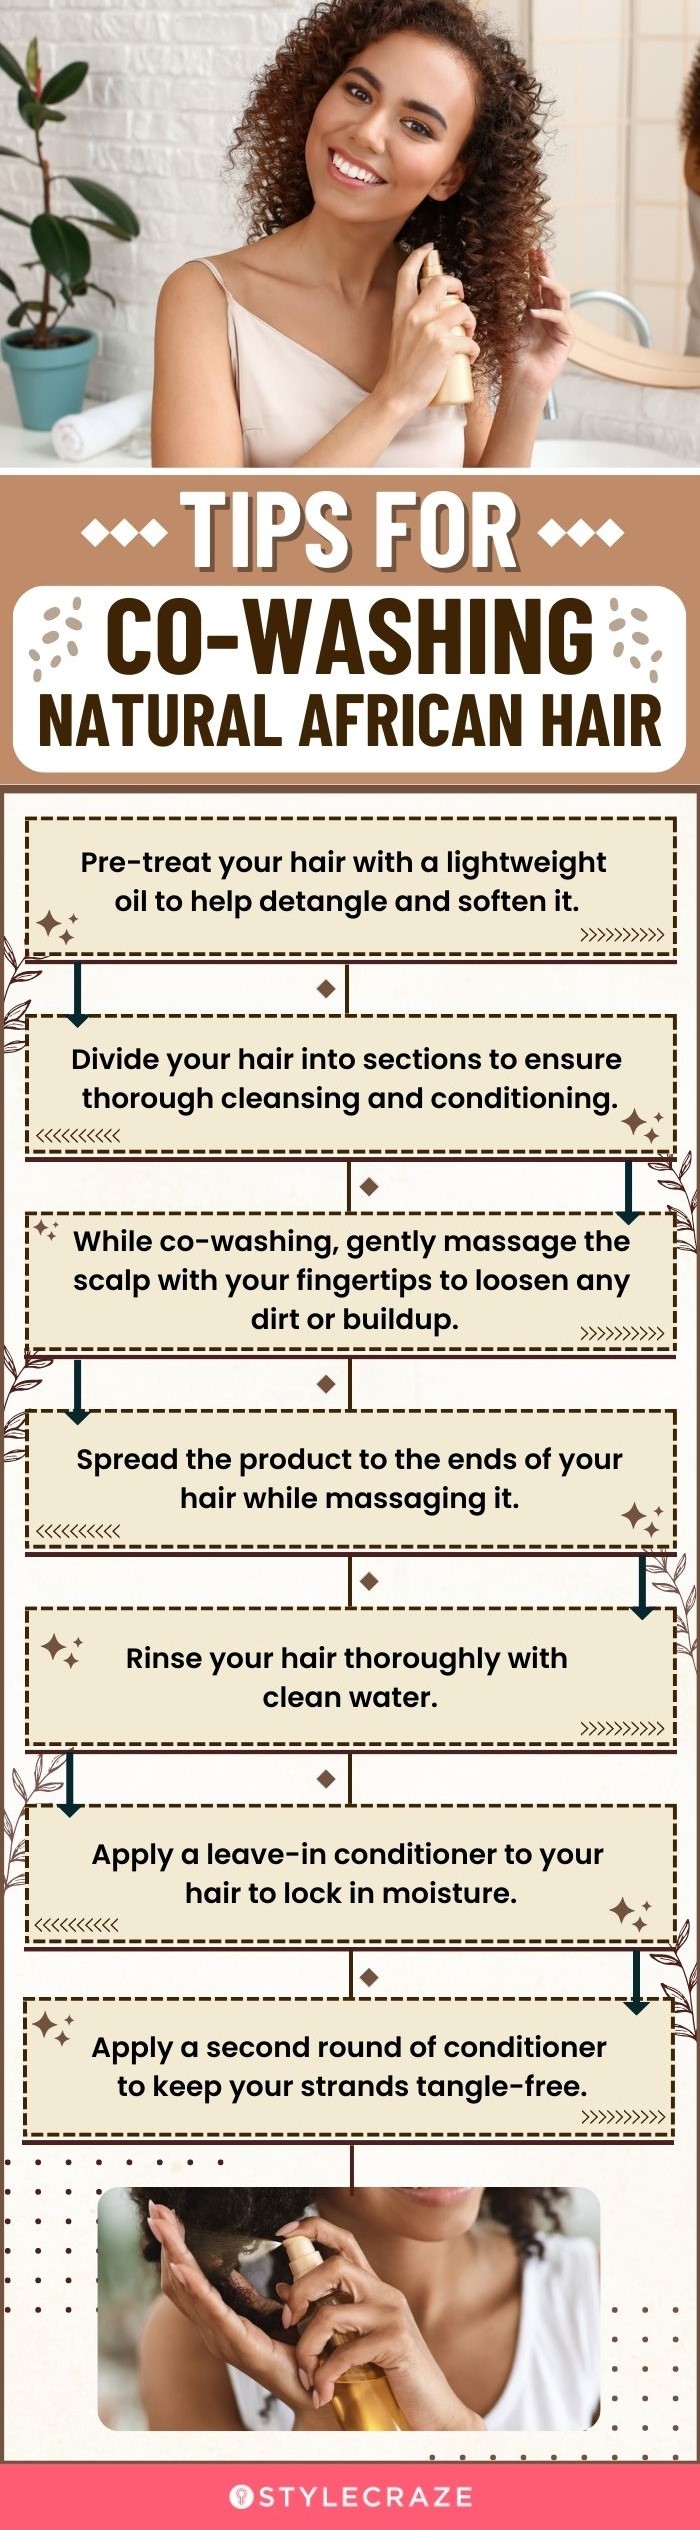 Tips For Co-Washing Natural African Hair (infographic)